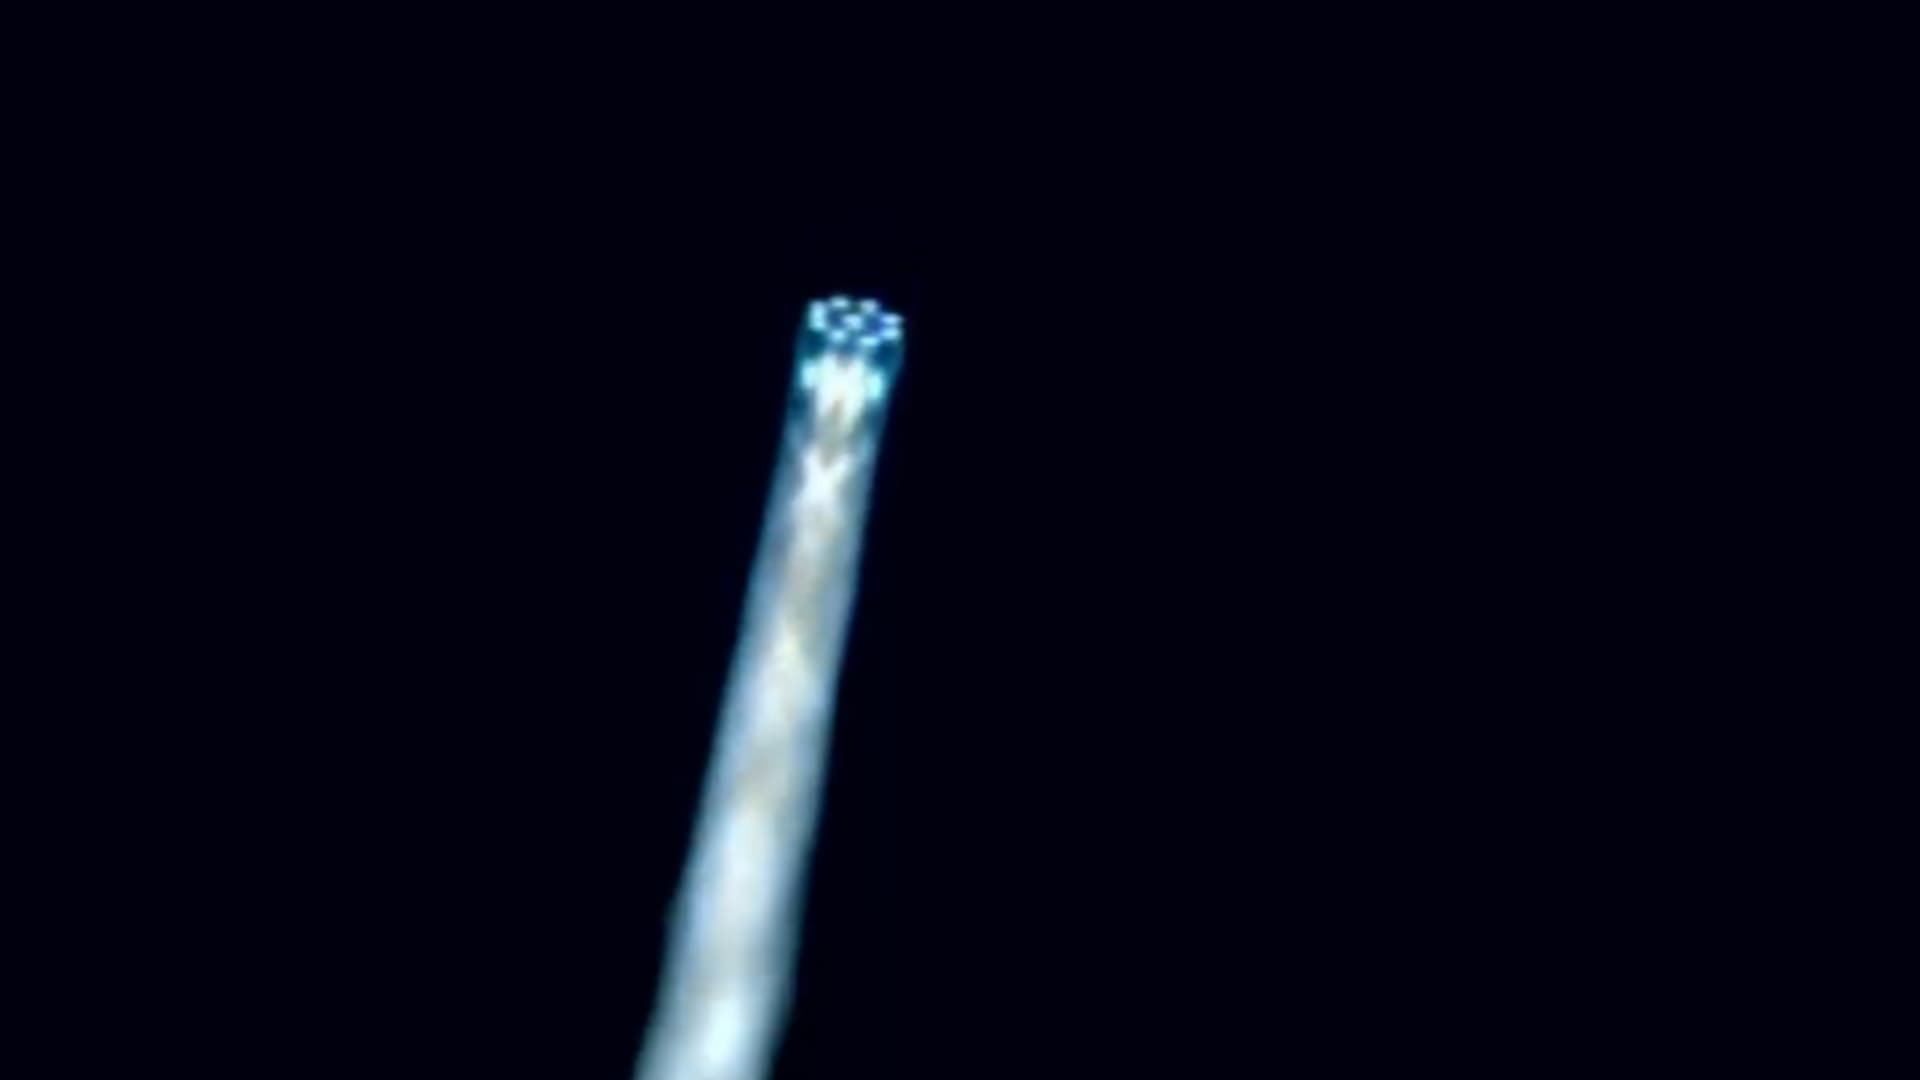 The blue flames of the Terran 1 rocket, which is powered by a mixture of liquid methane and liquid oxygen (or methalox), as it launched.